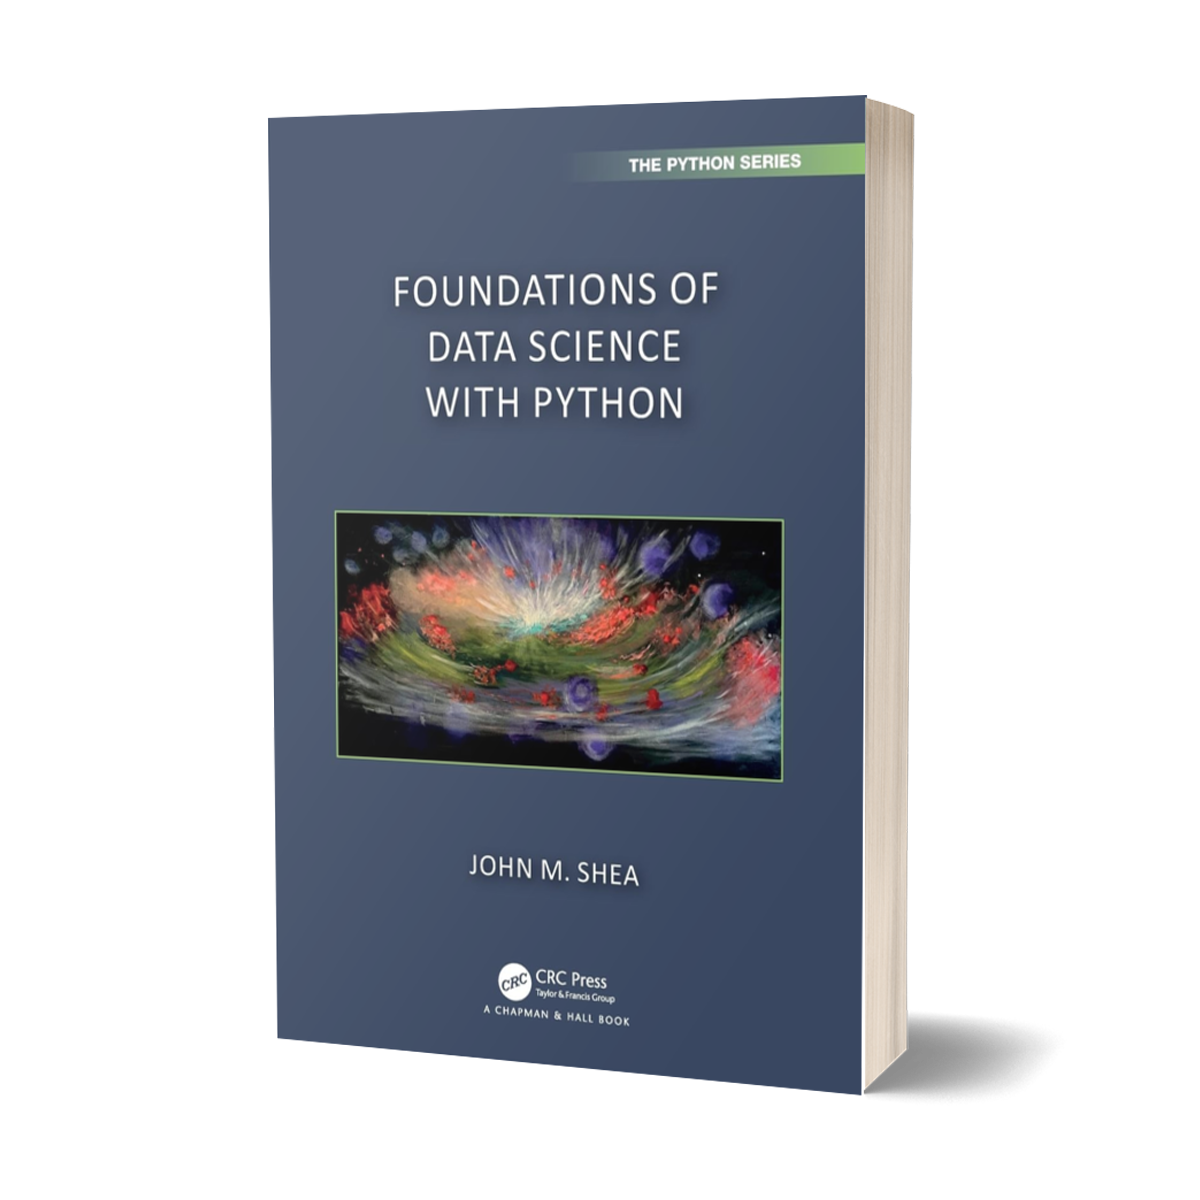 Cover image for the published book Foundations of Data Science with Python by John M. Shea